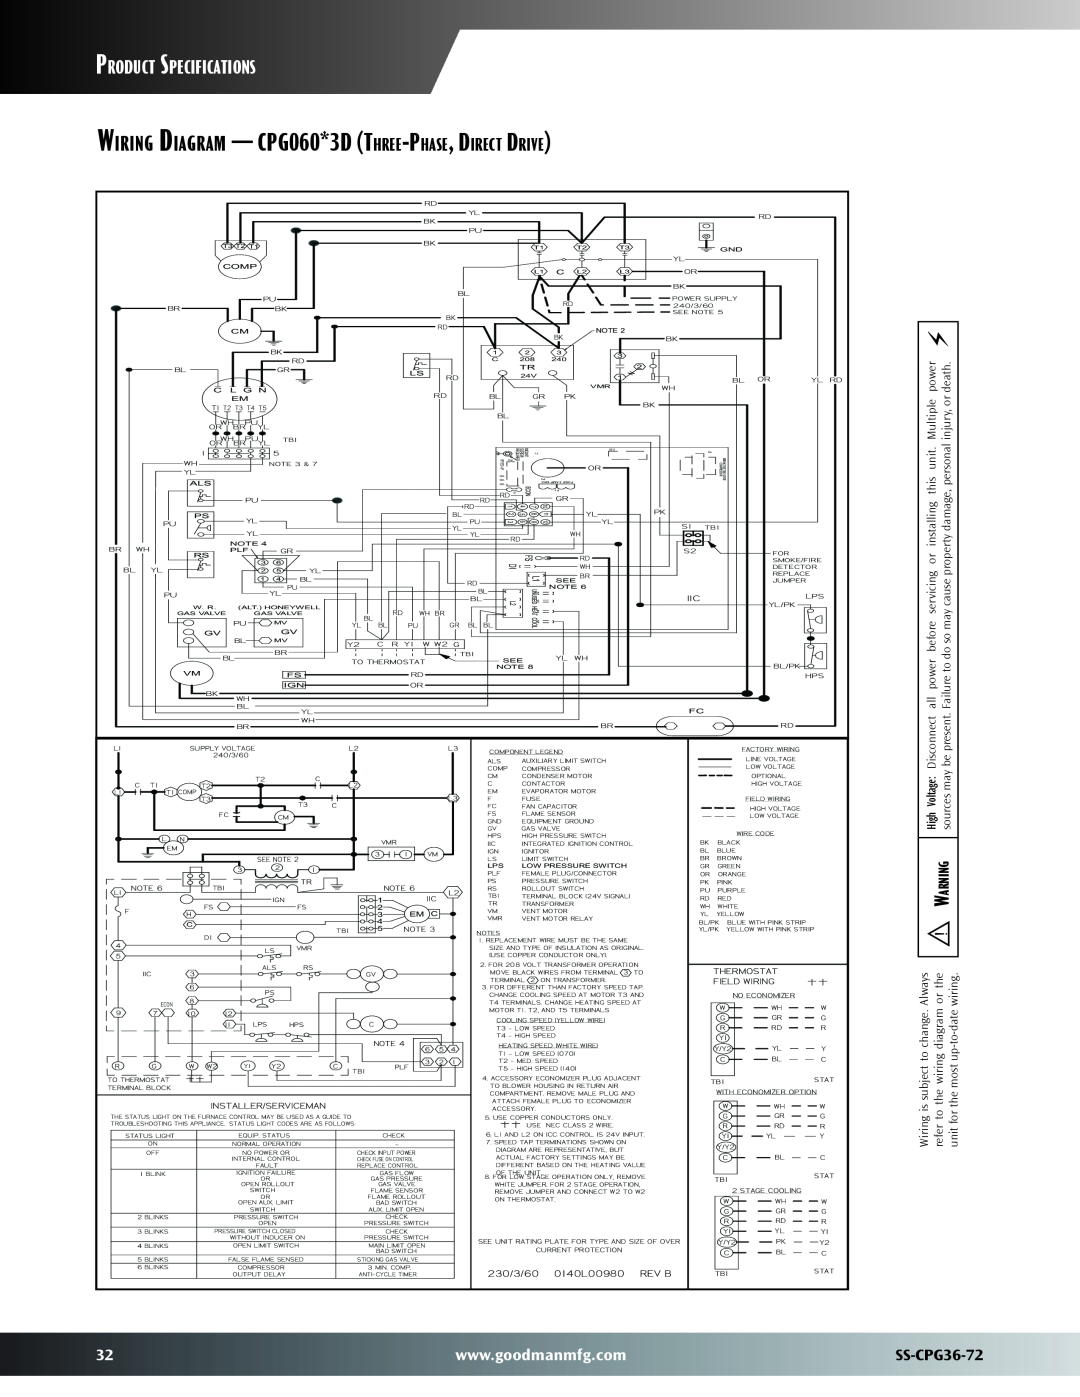 Goodman Mfg SS-CPG36-72 warranty Product Specifications, Multiple injury, or, present, 230/3/60 0140L00980 REV B 